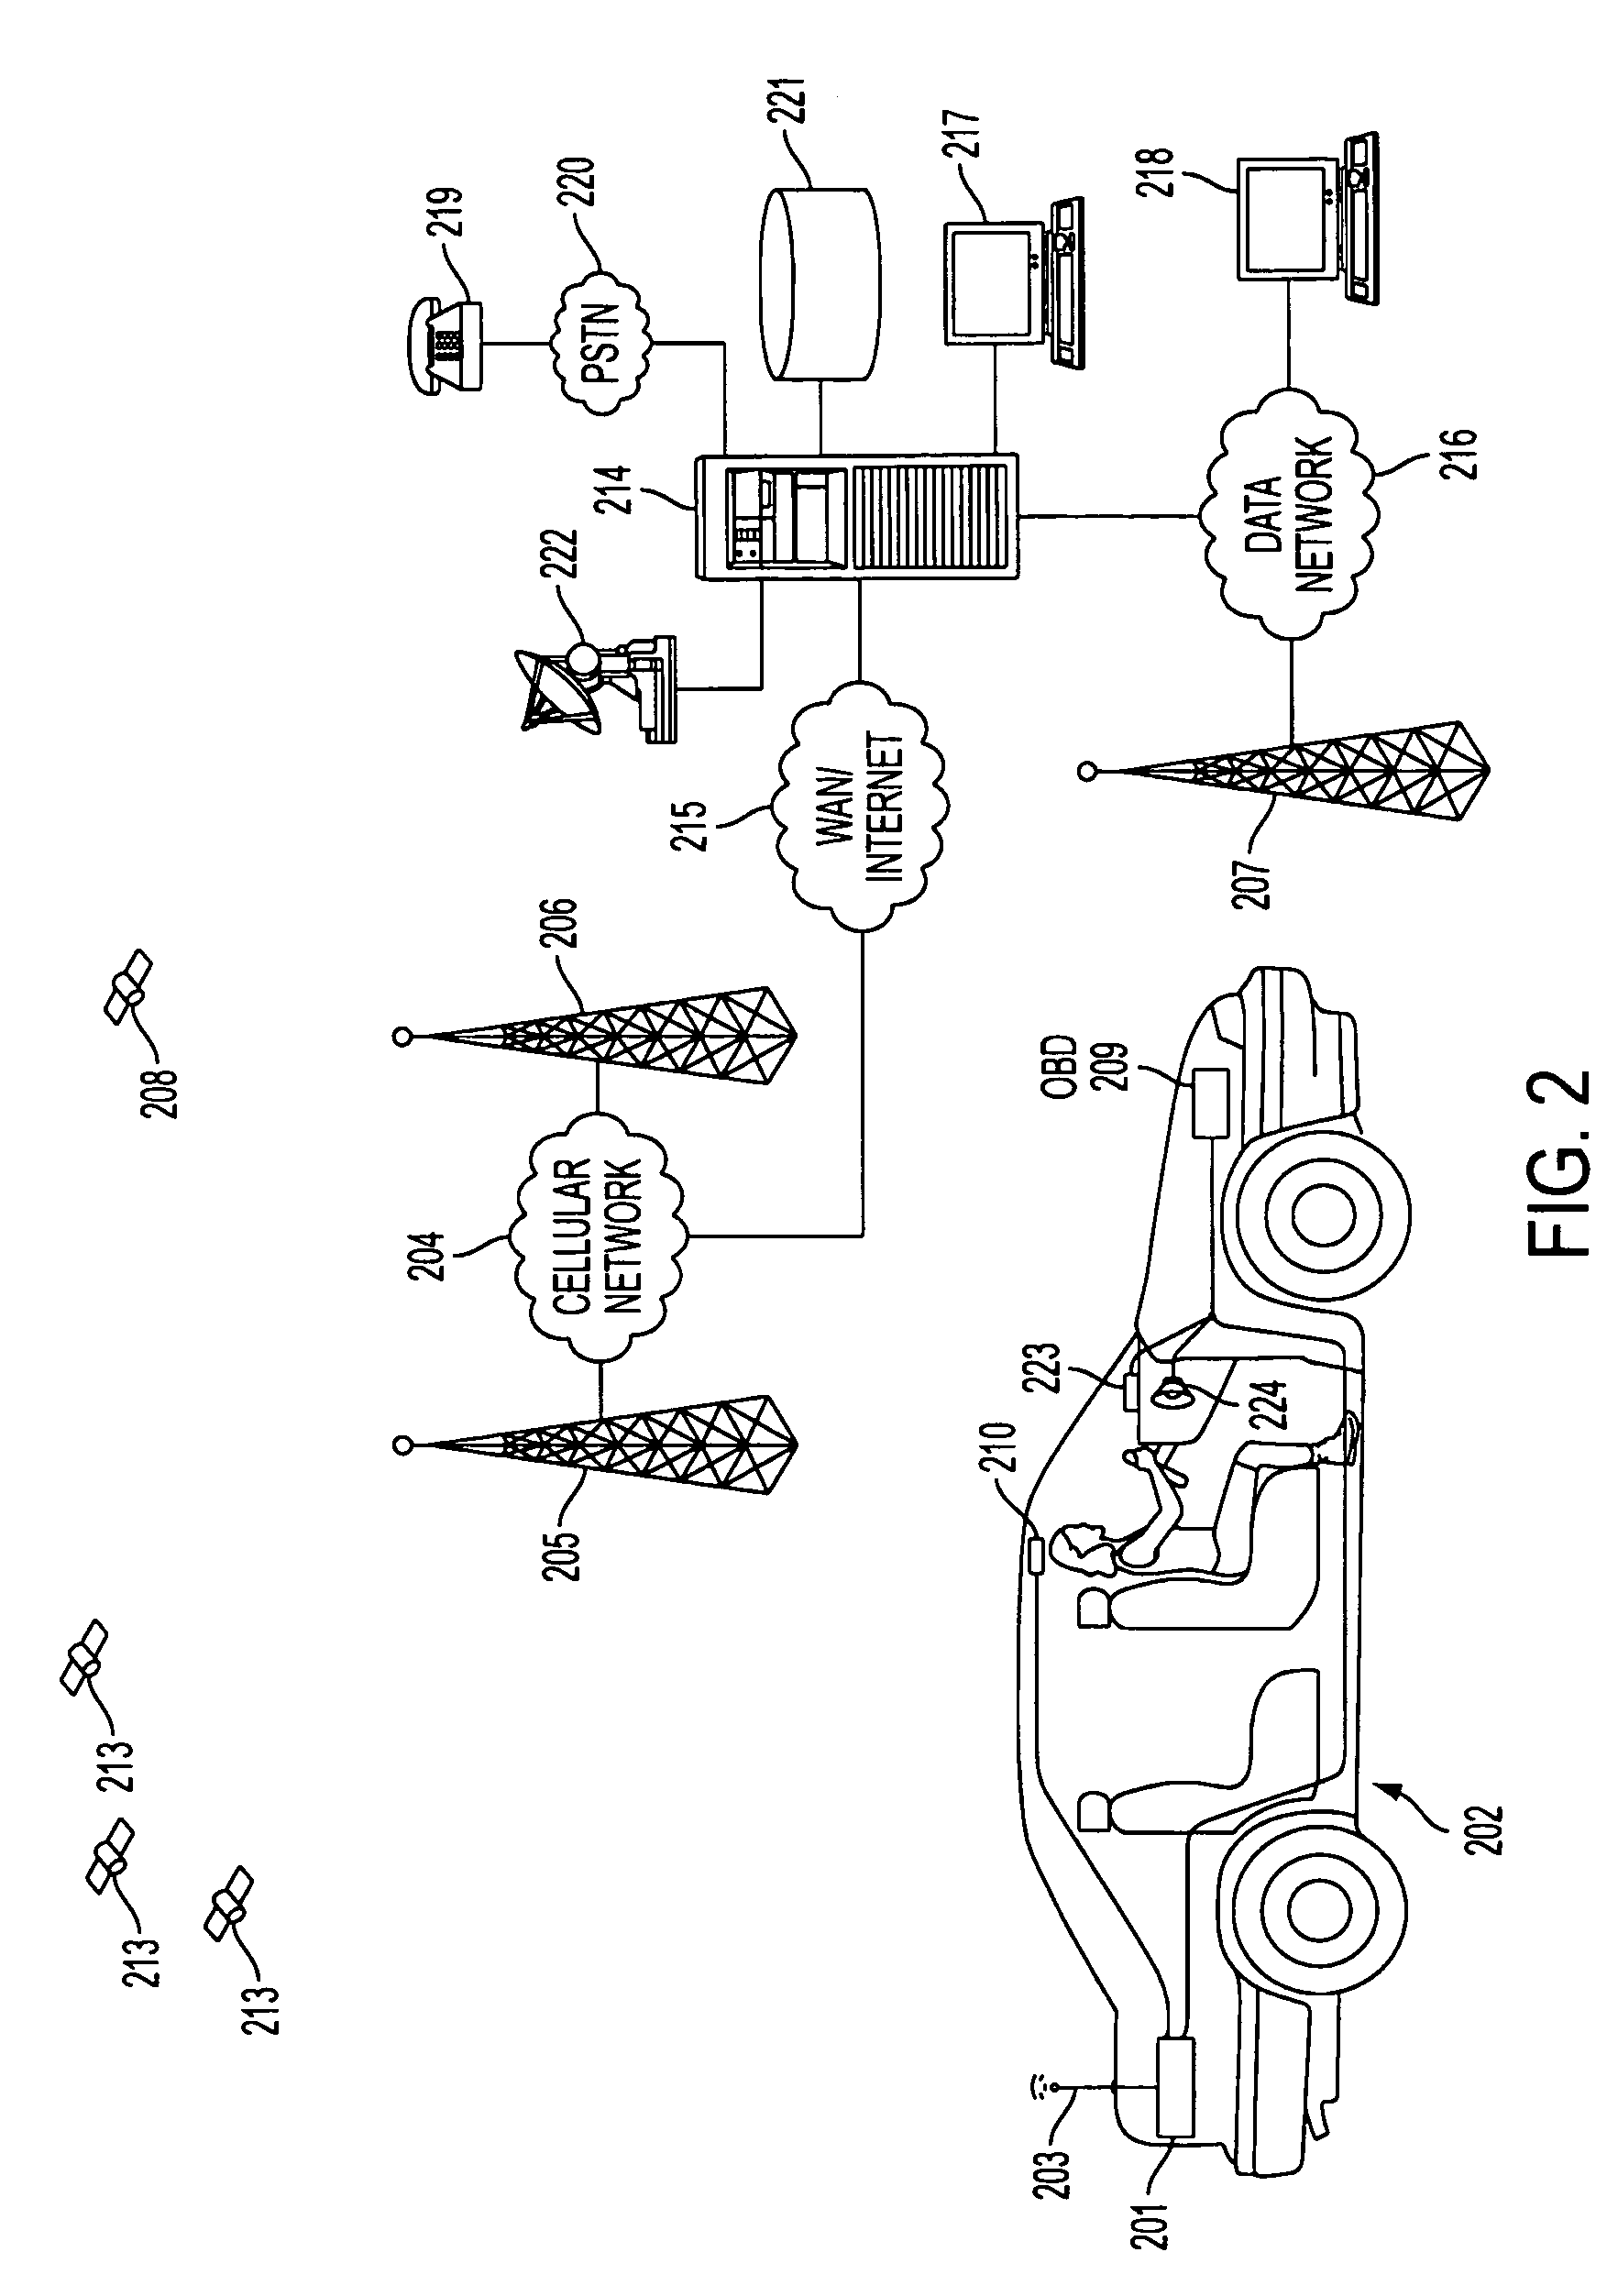 System and method for alerting drivers to road conditions